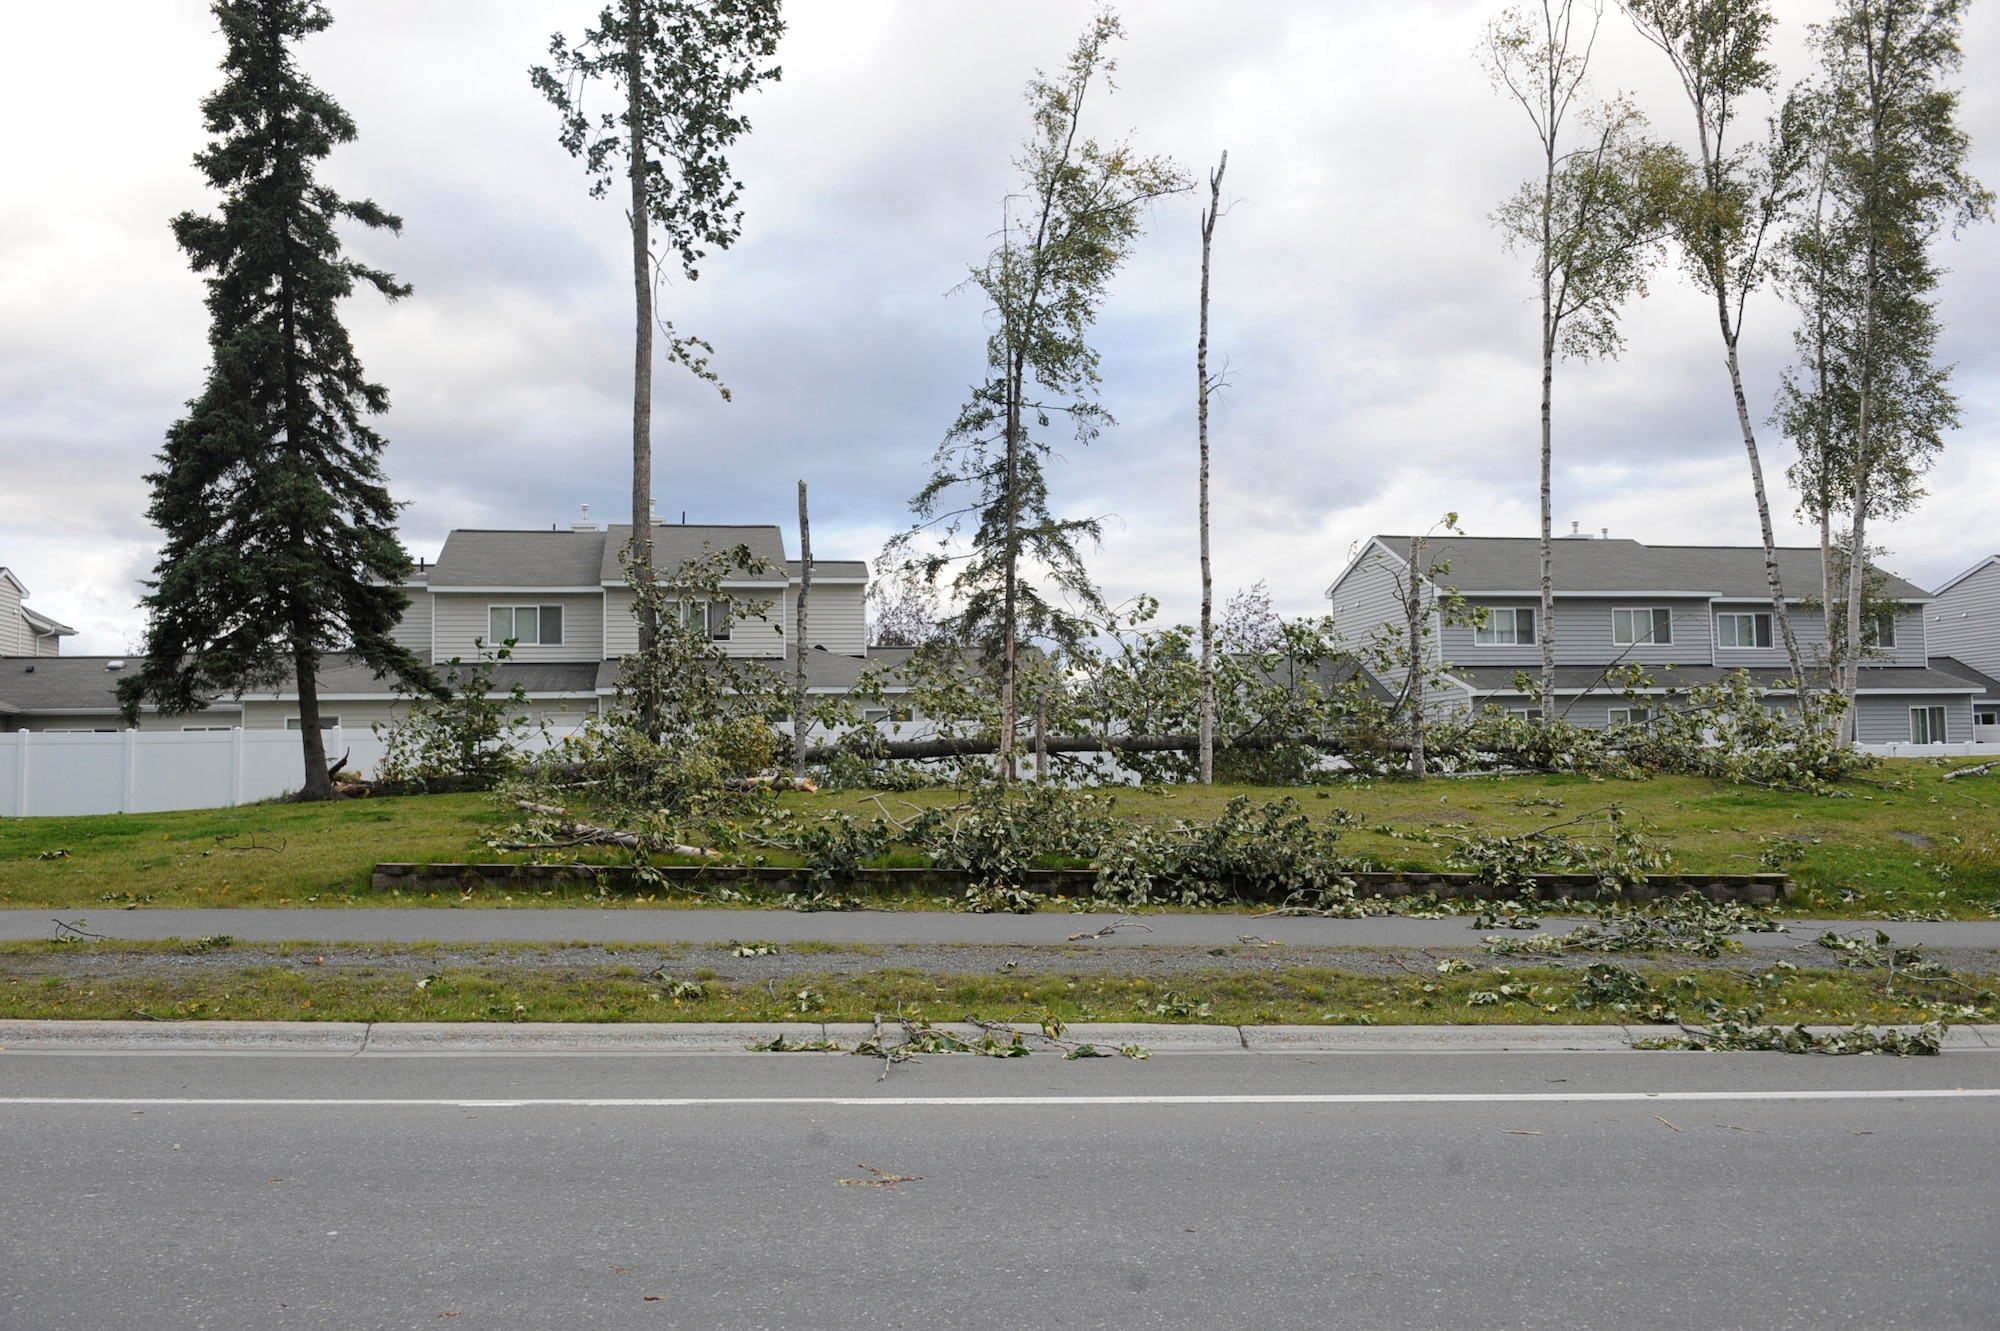 An arctic storm, producing winds gusting to more than 100 miles per hour, caused extensive damage Sept. 4 and 5, including knocking down street signs and trees on Joint Base Elmendorf-Richardson, Alaska. Emergency personnel's first priority after the storm was clearing streets for safe traffic flow. (U.S. Air Force photo/Staff Sgt. Robert Barnett)